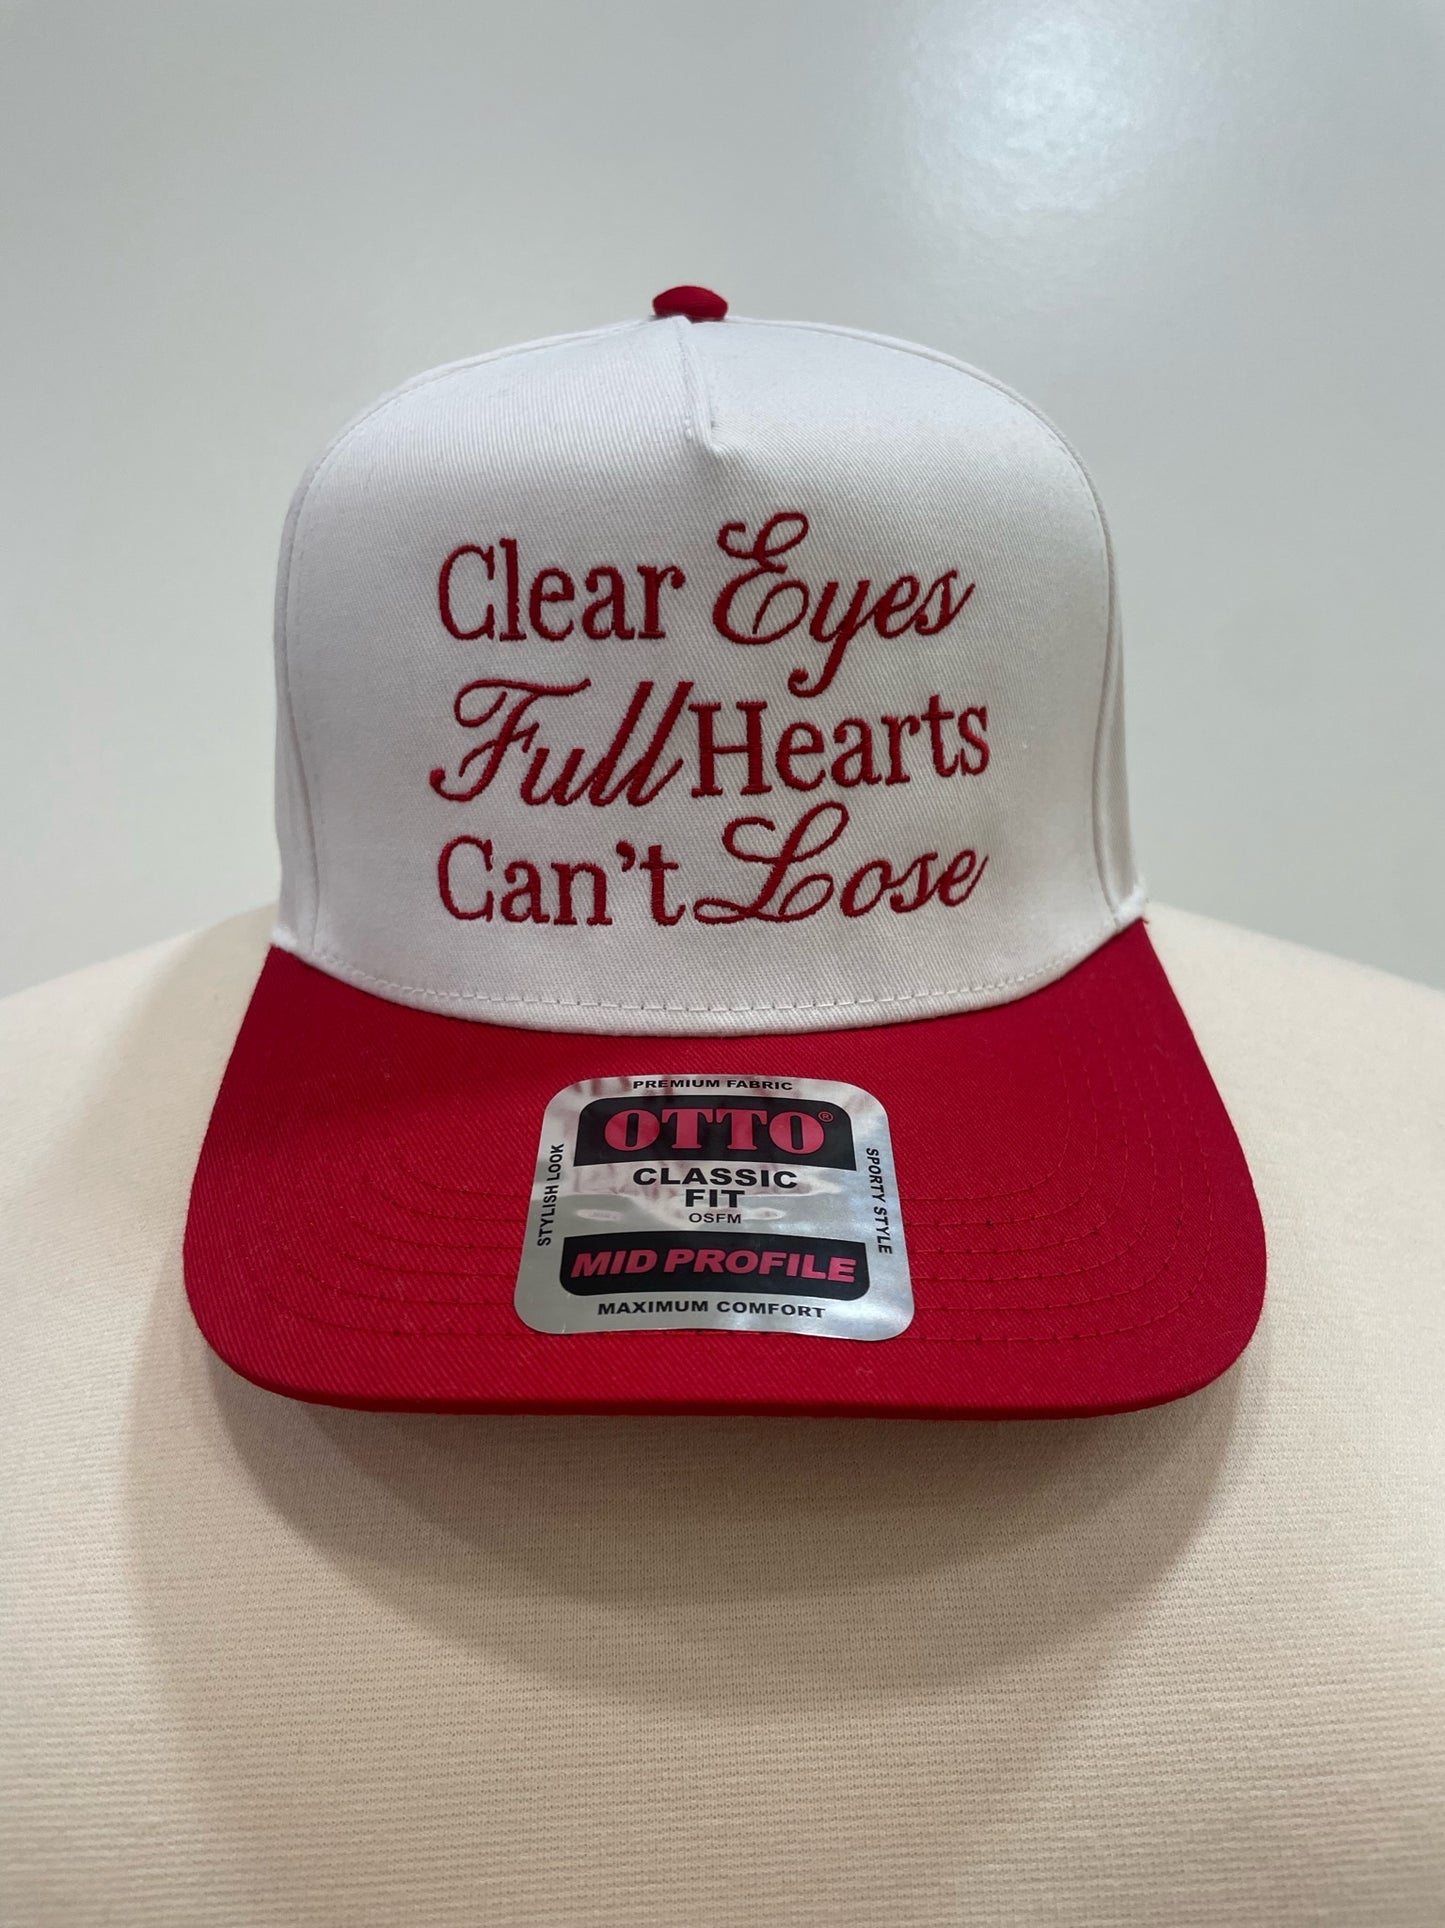 Can’t Lose - Trucker Hat